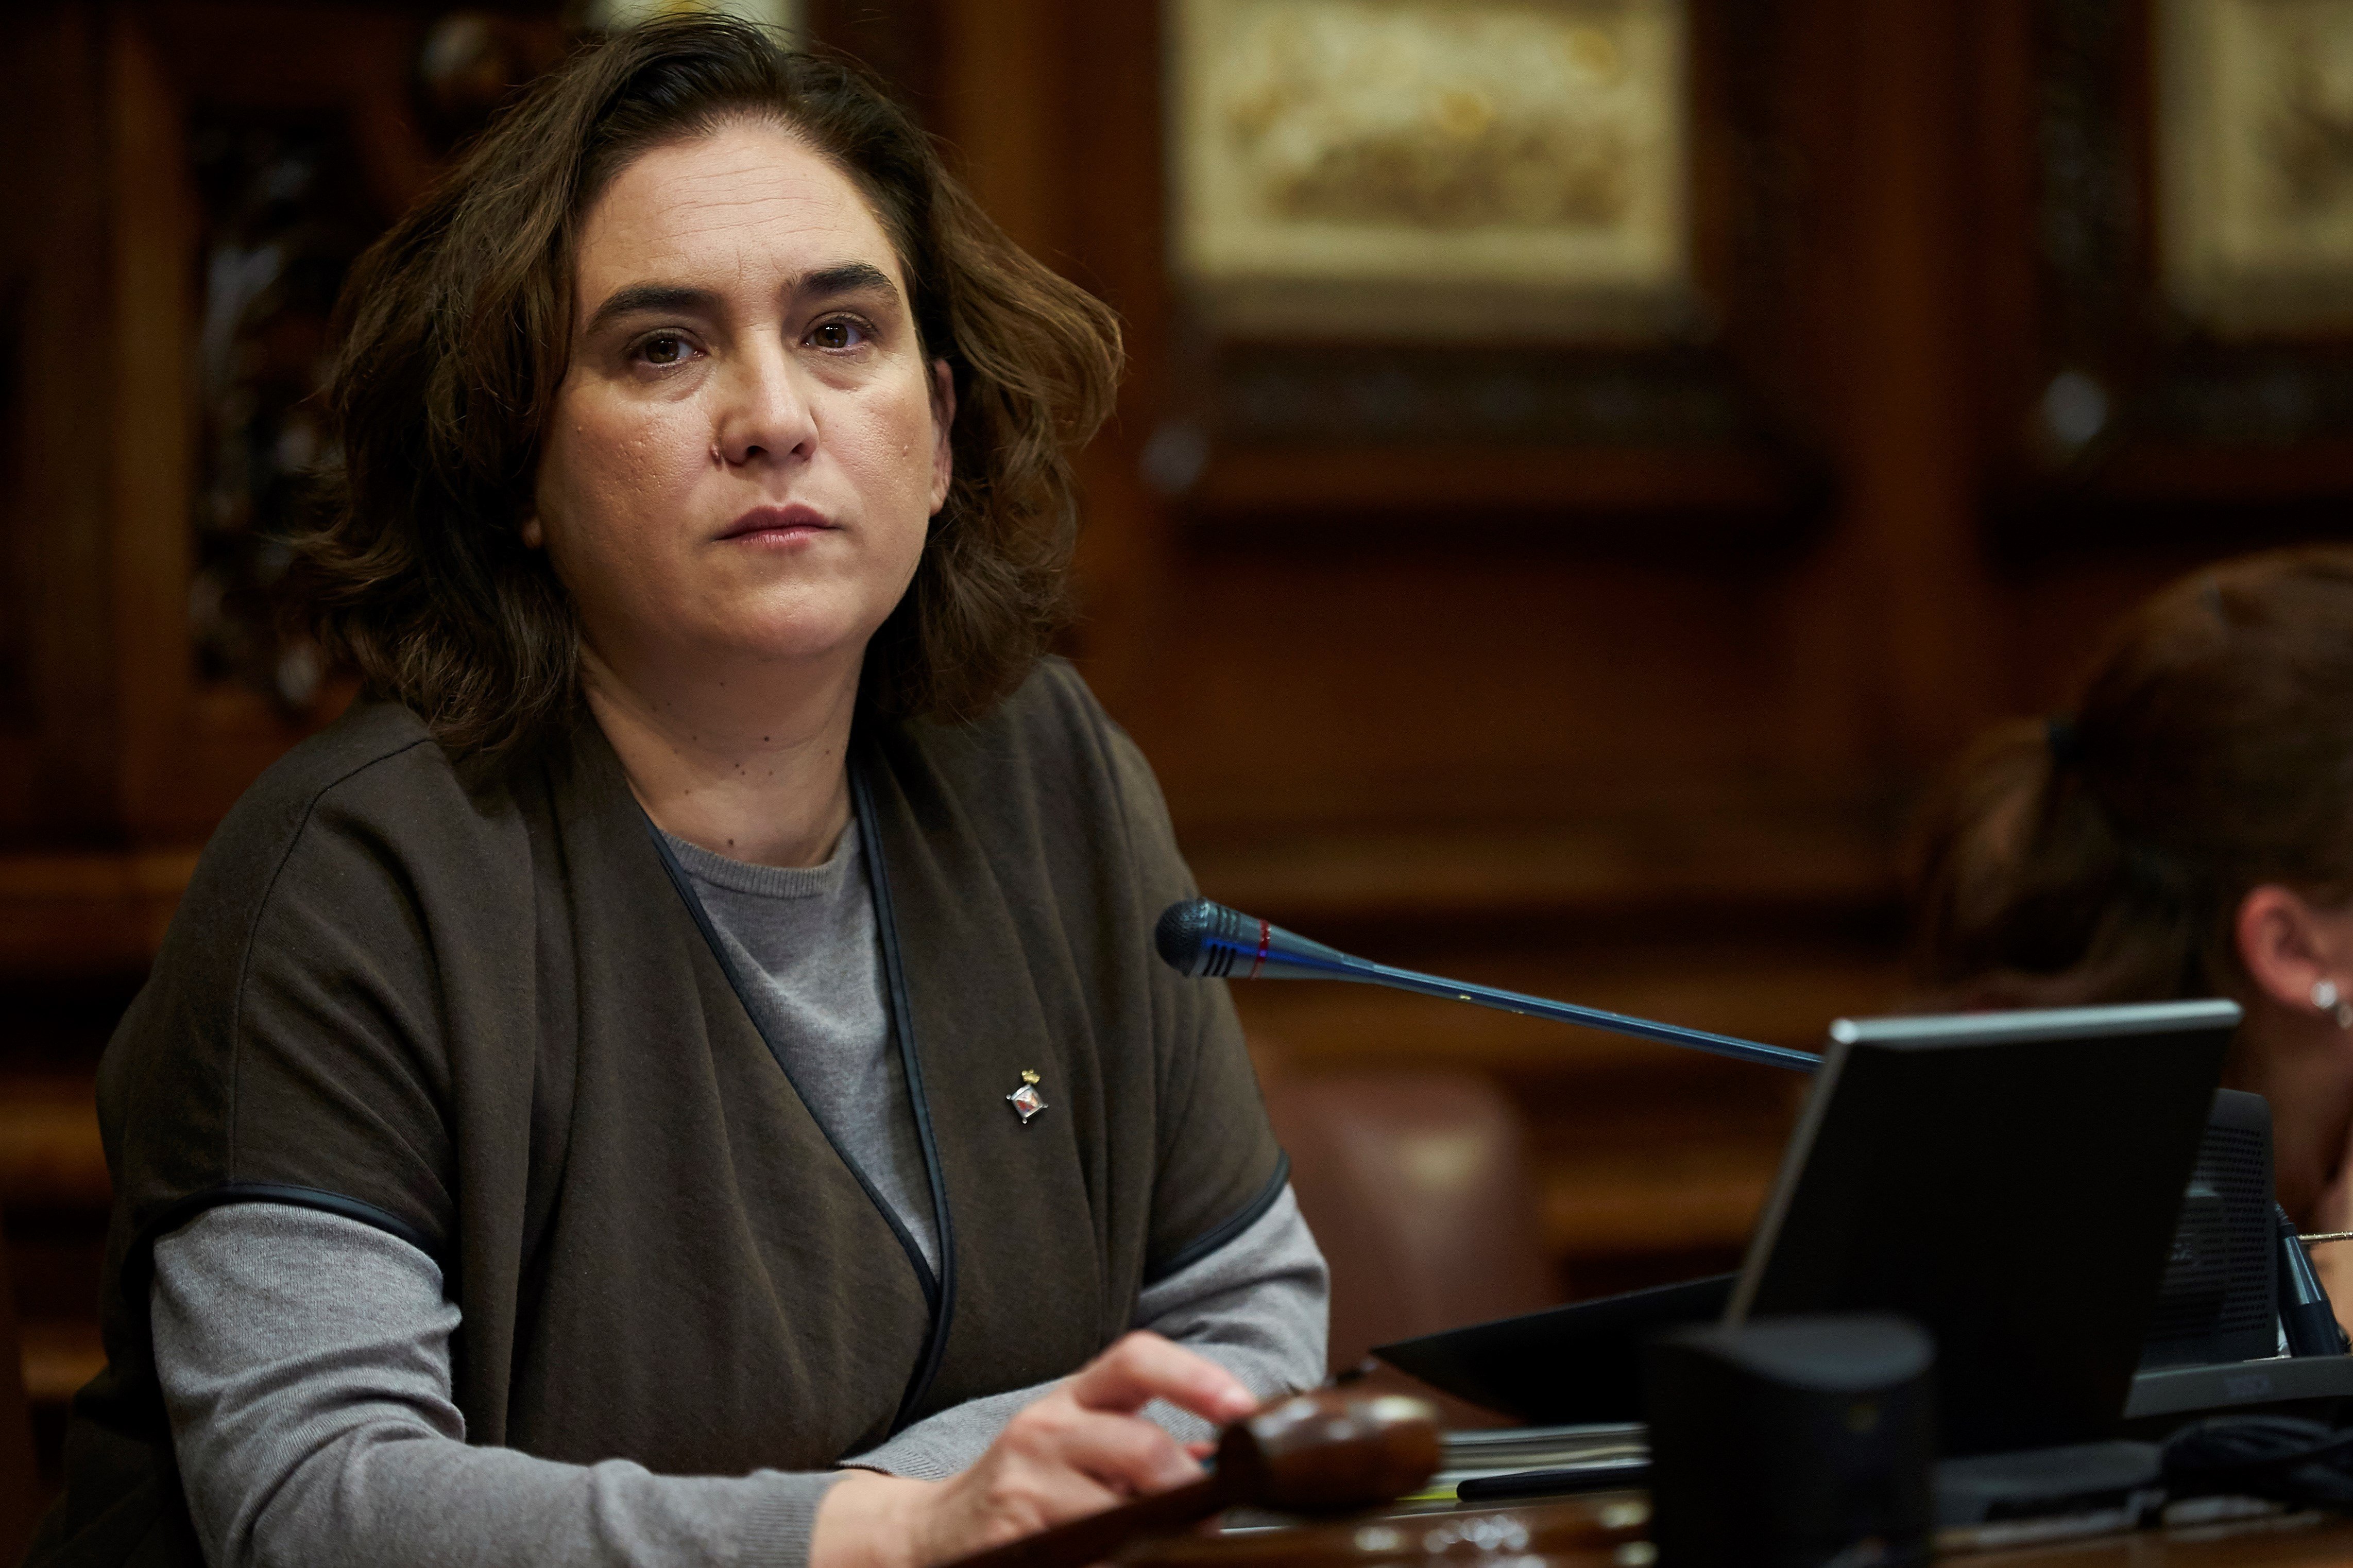 Poll says Ada Colau could lose Barcelona mayoralty to ERC